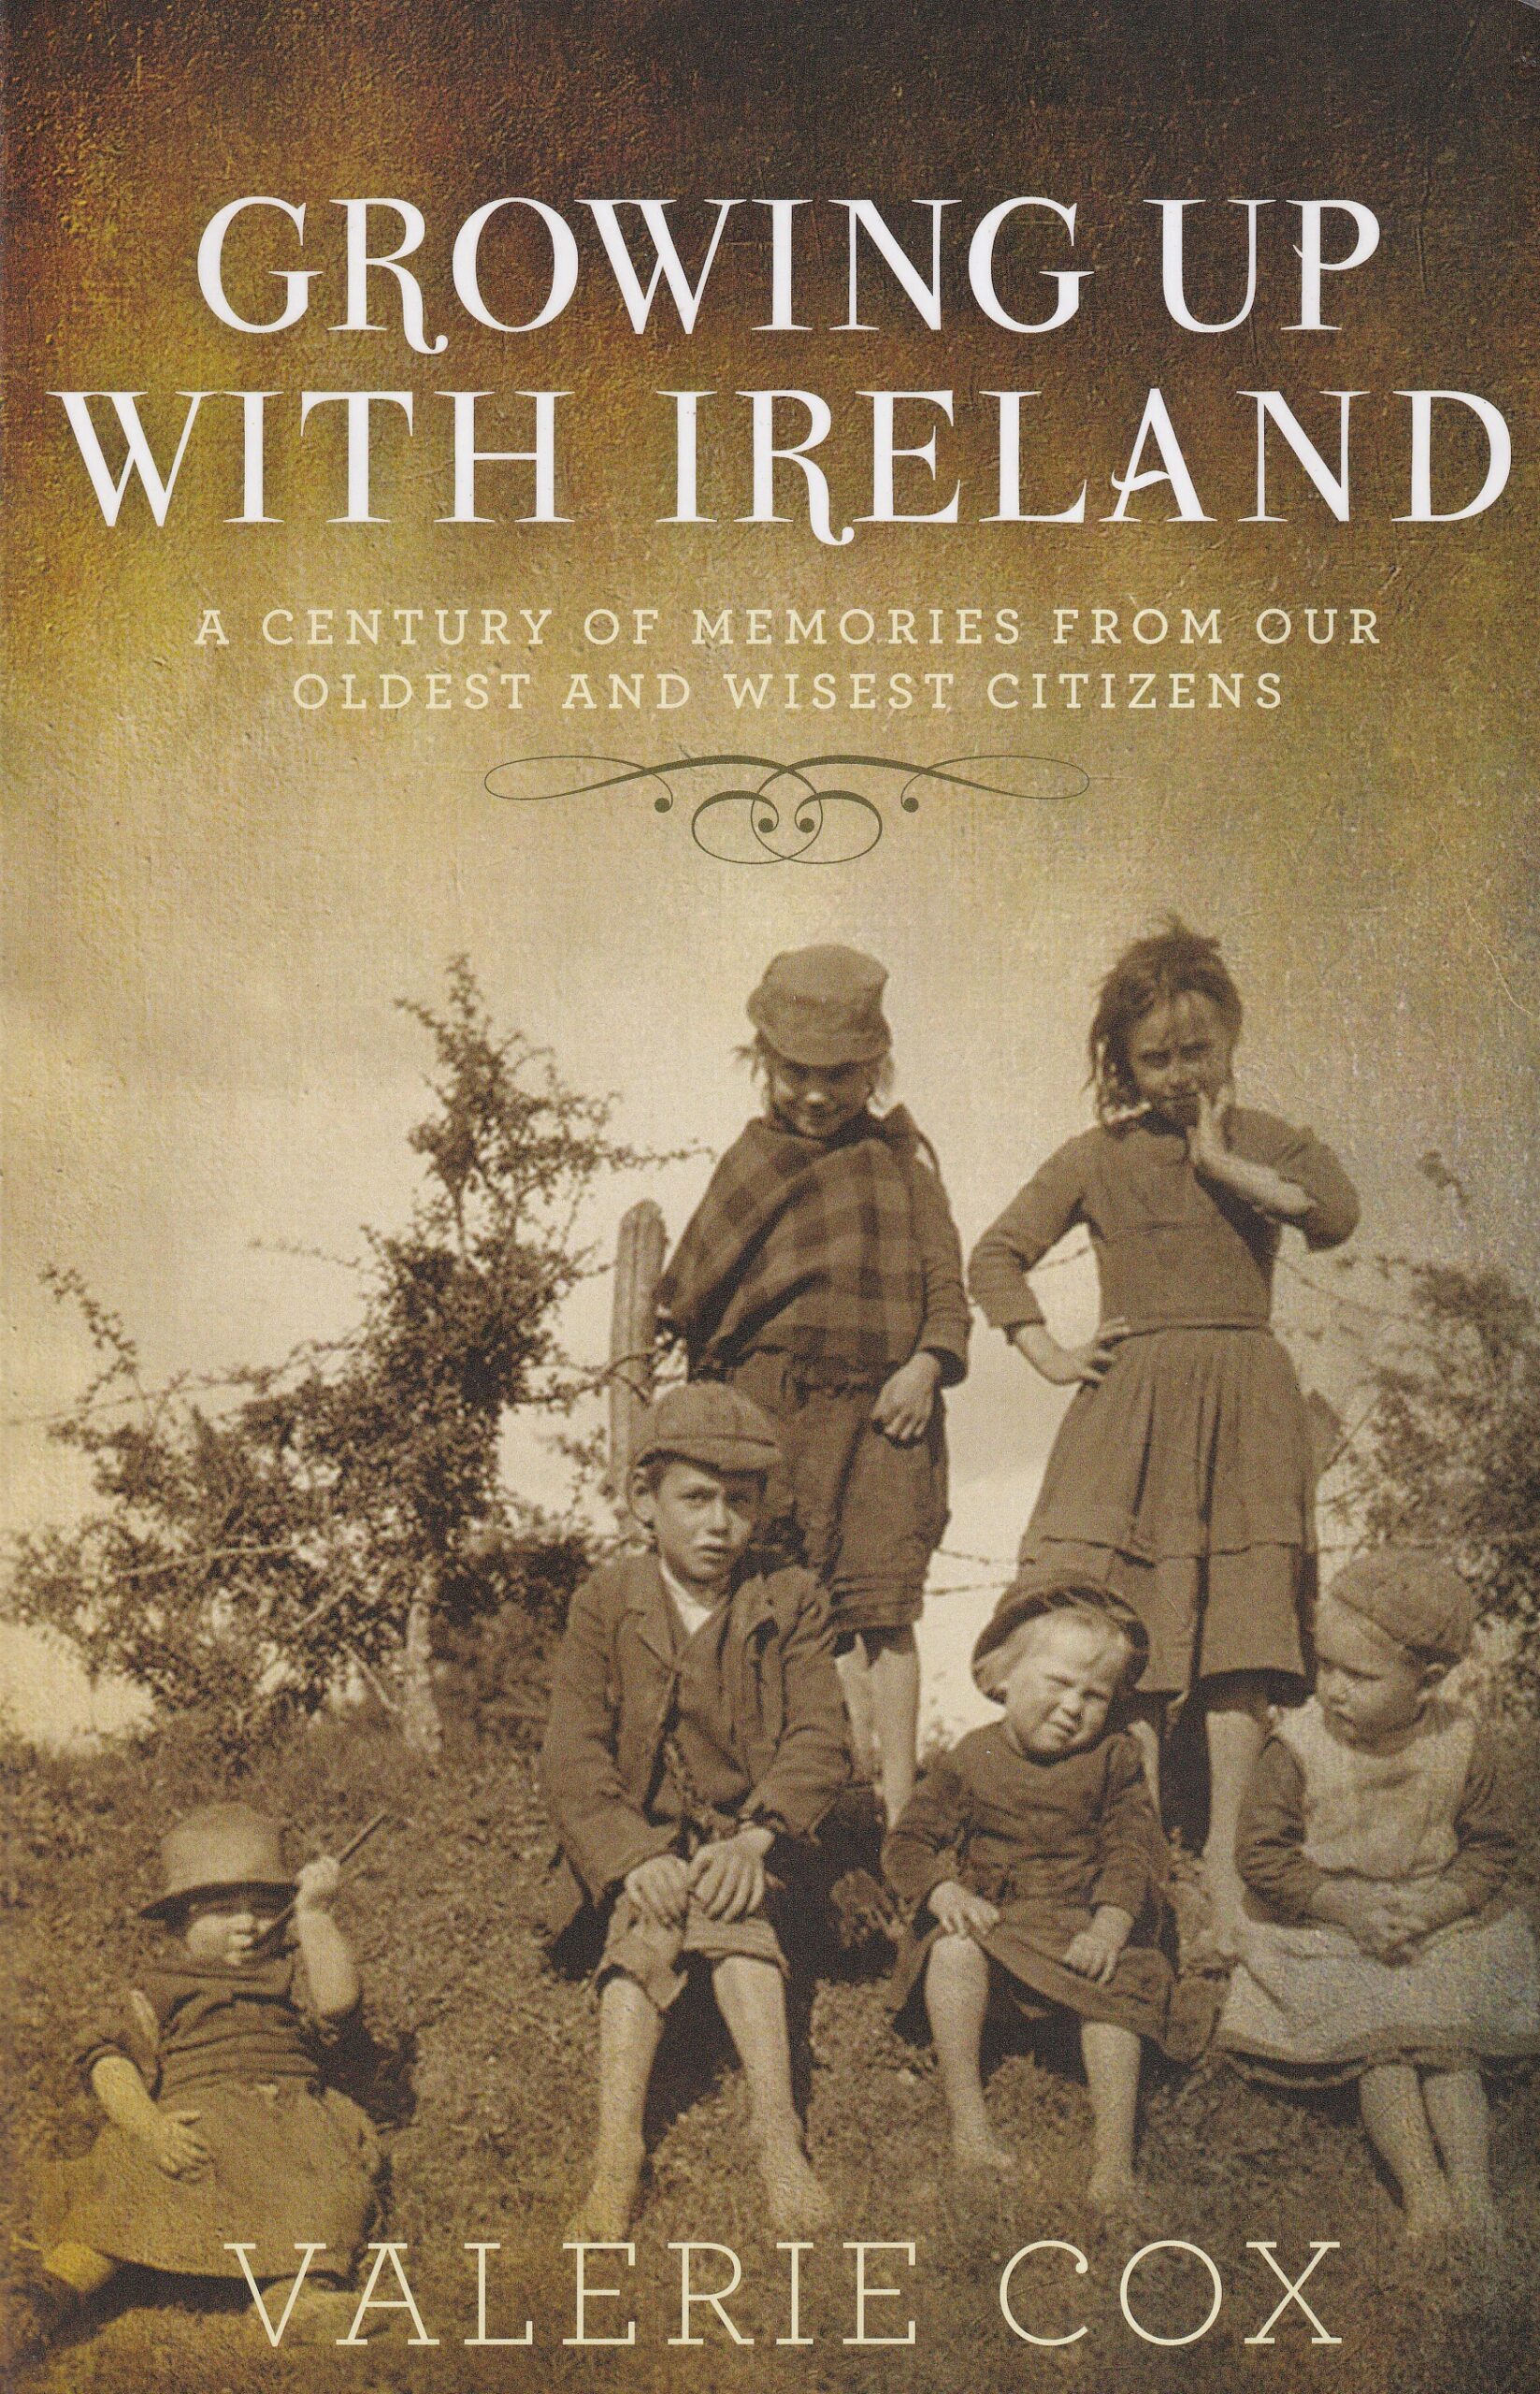 Growing Up With Ireland: A Century of Memories from Our Oldest and Wisest Citizens by Valerie Cox